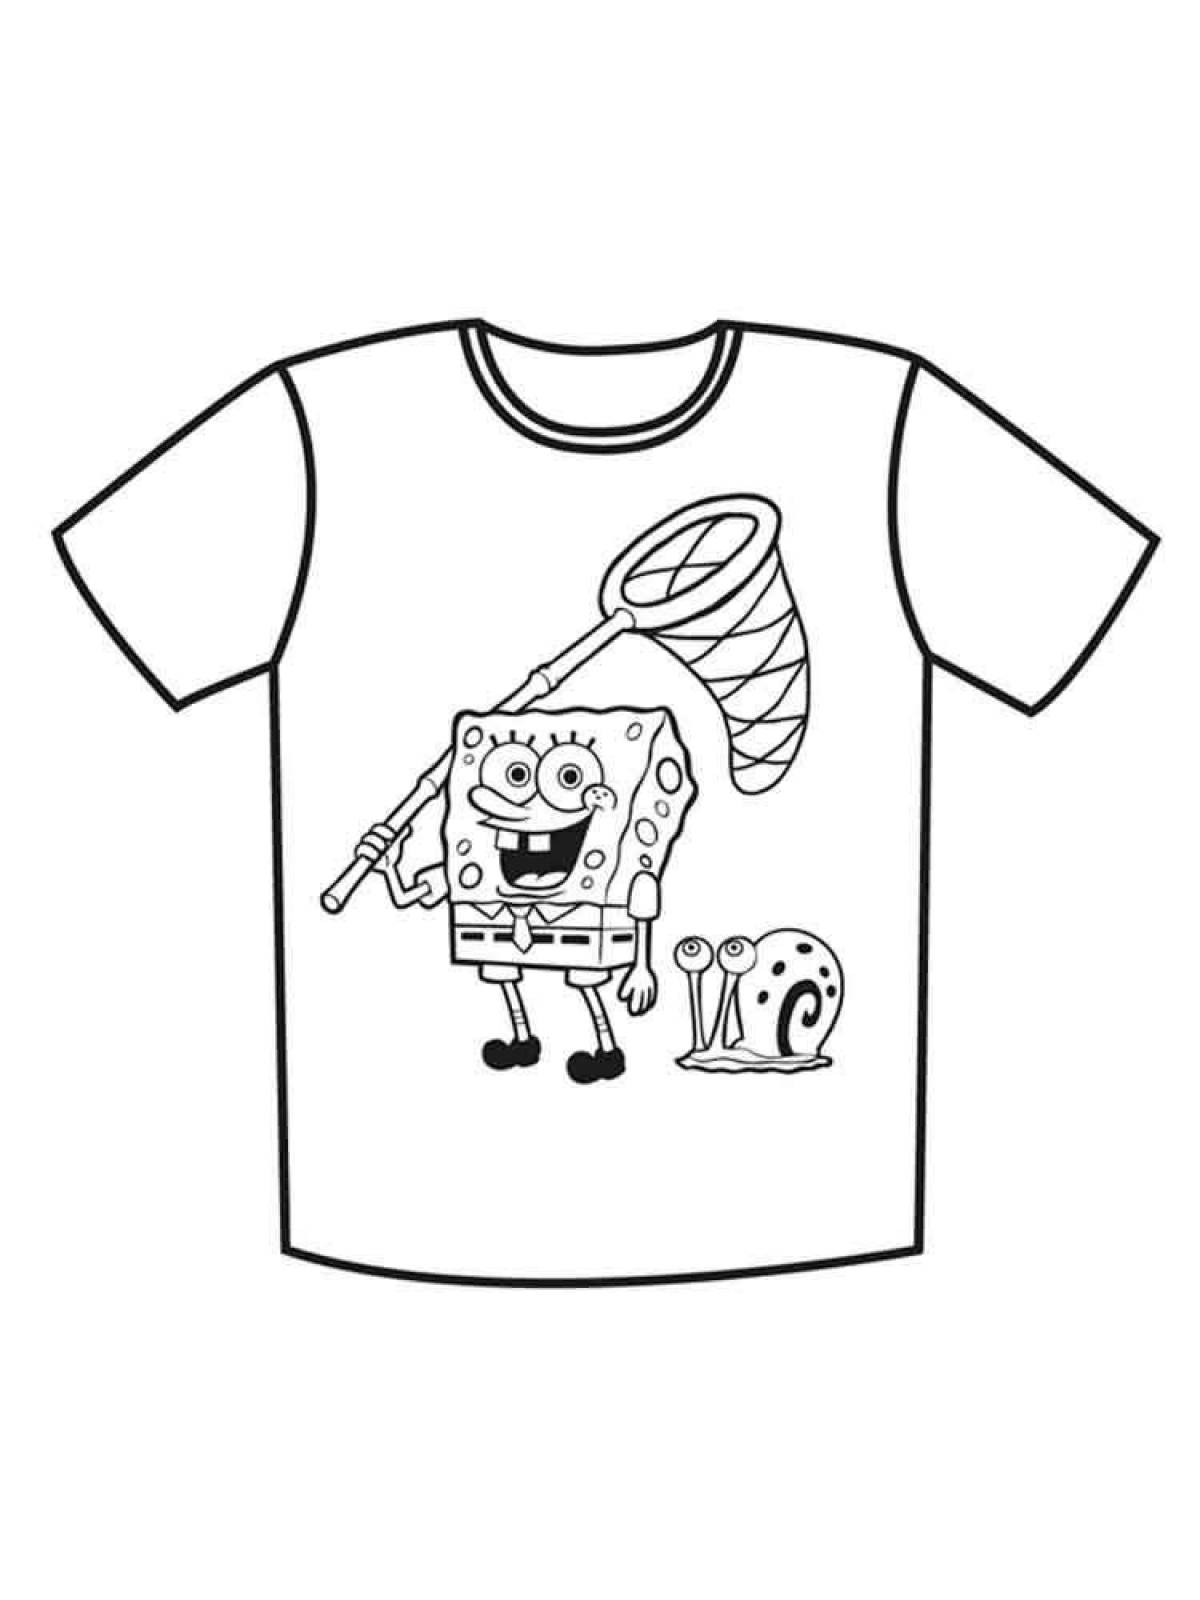 Coloring pages with t-shirts for kids